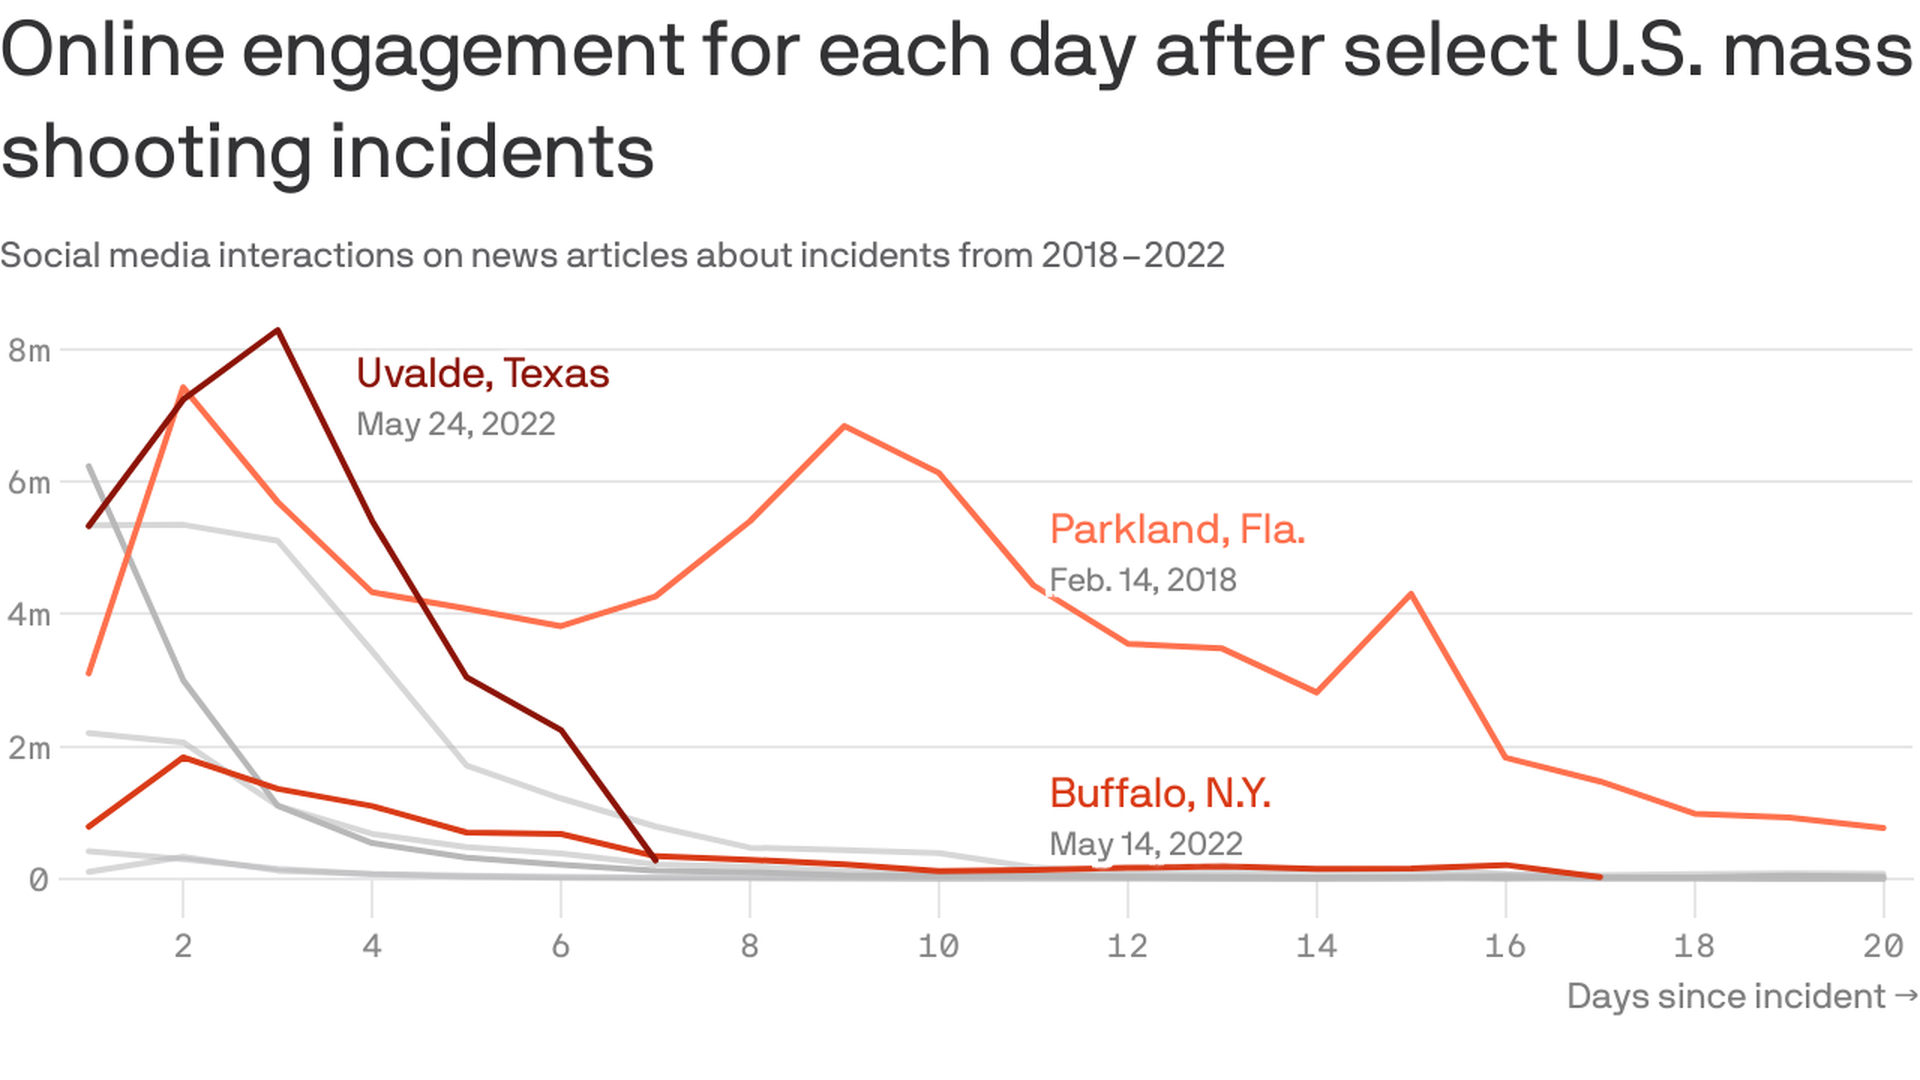 A chart showing online engagement for each day after select U.S. mass shooting incidents.